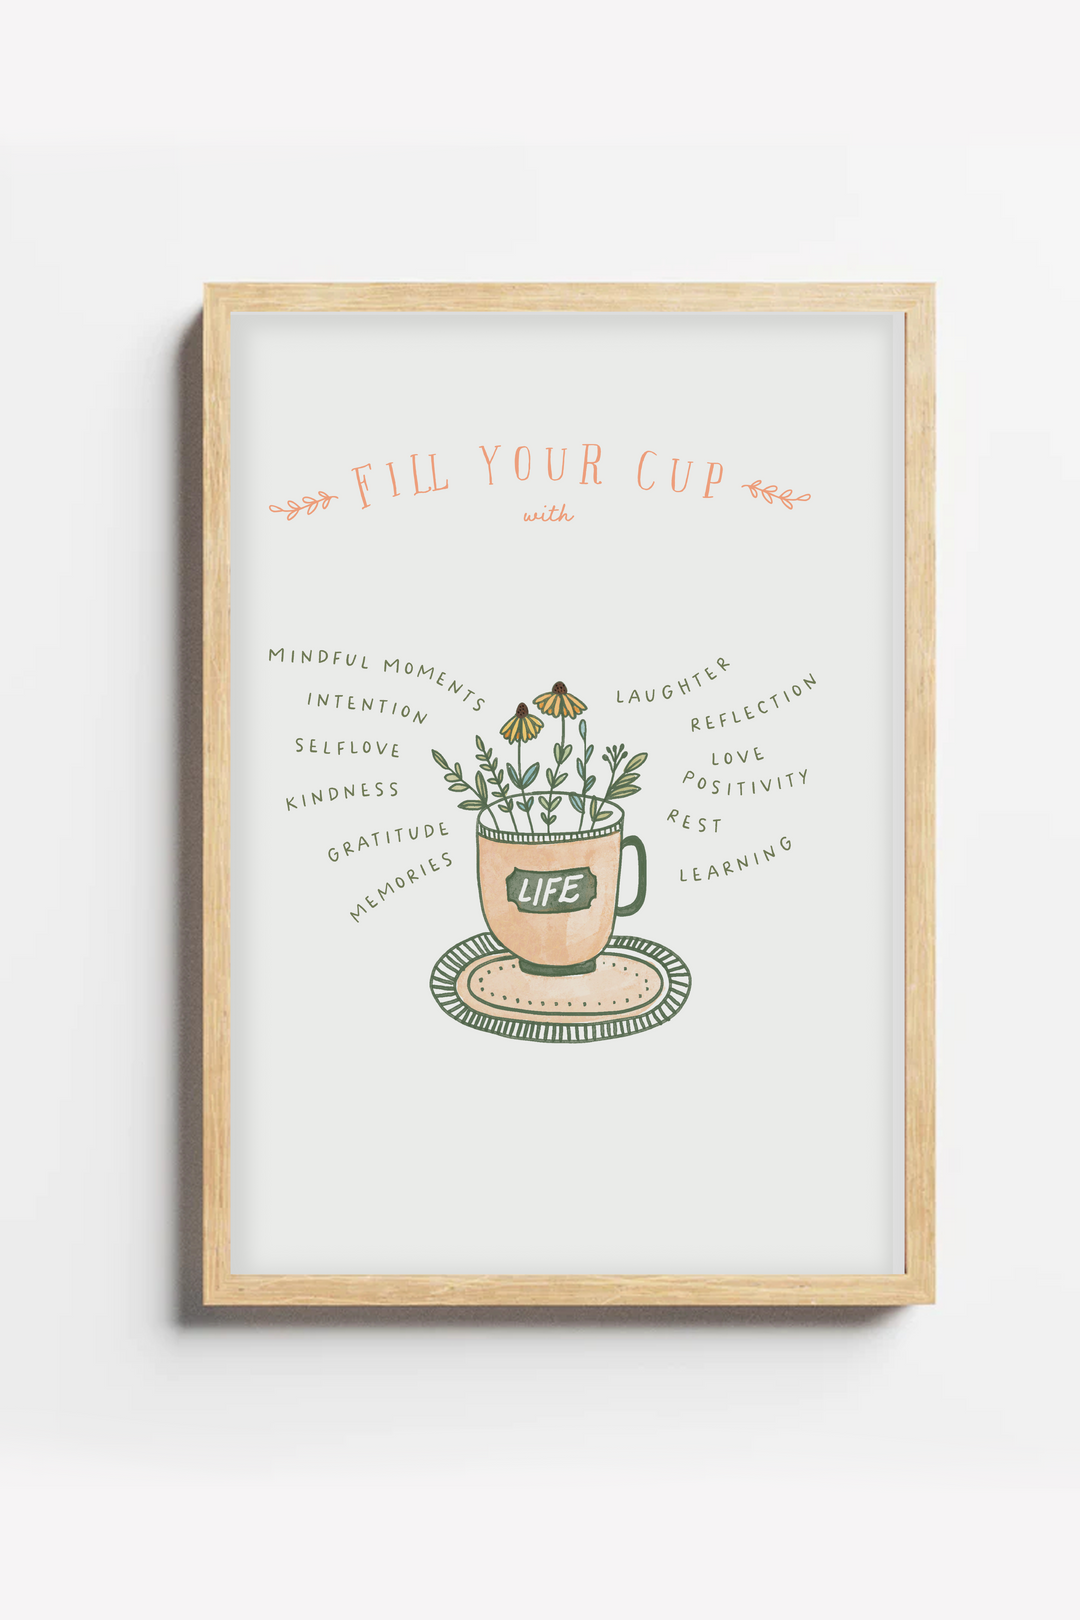 Fill your Cup